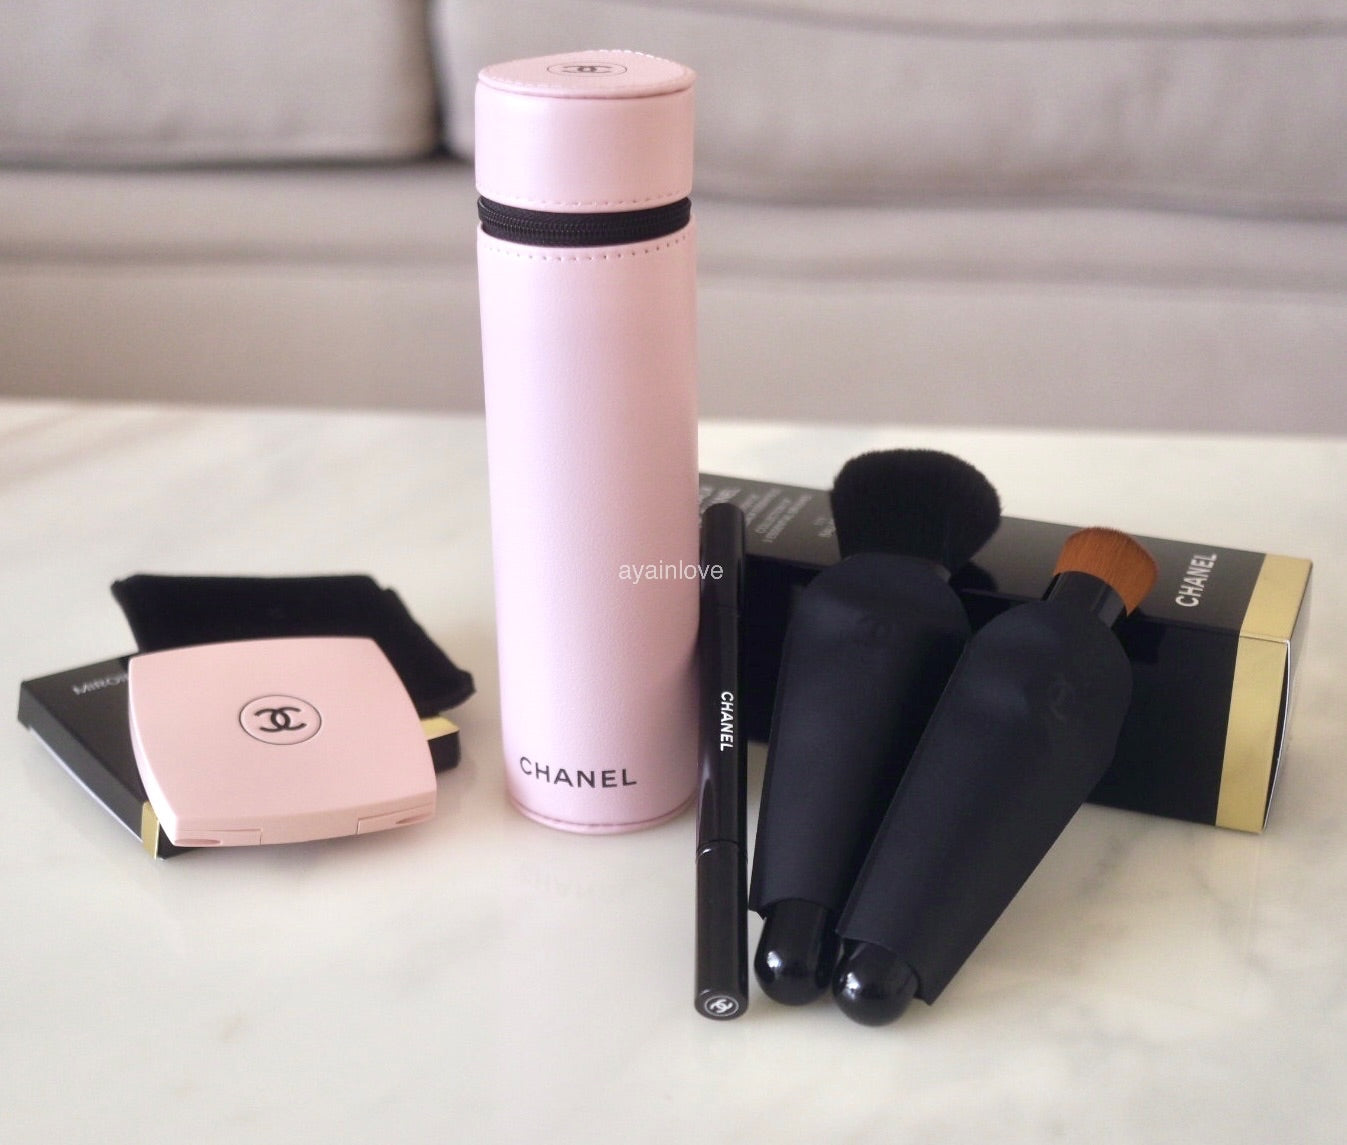 CHANEL Colour Codes Pink Ballerina Brush Set (3 Brushes) and